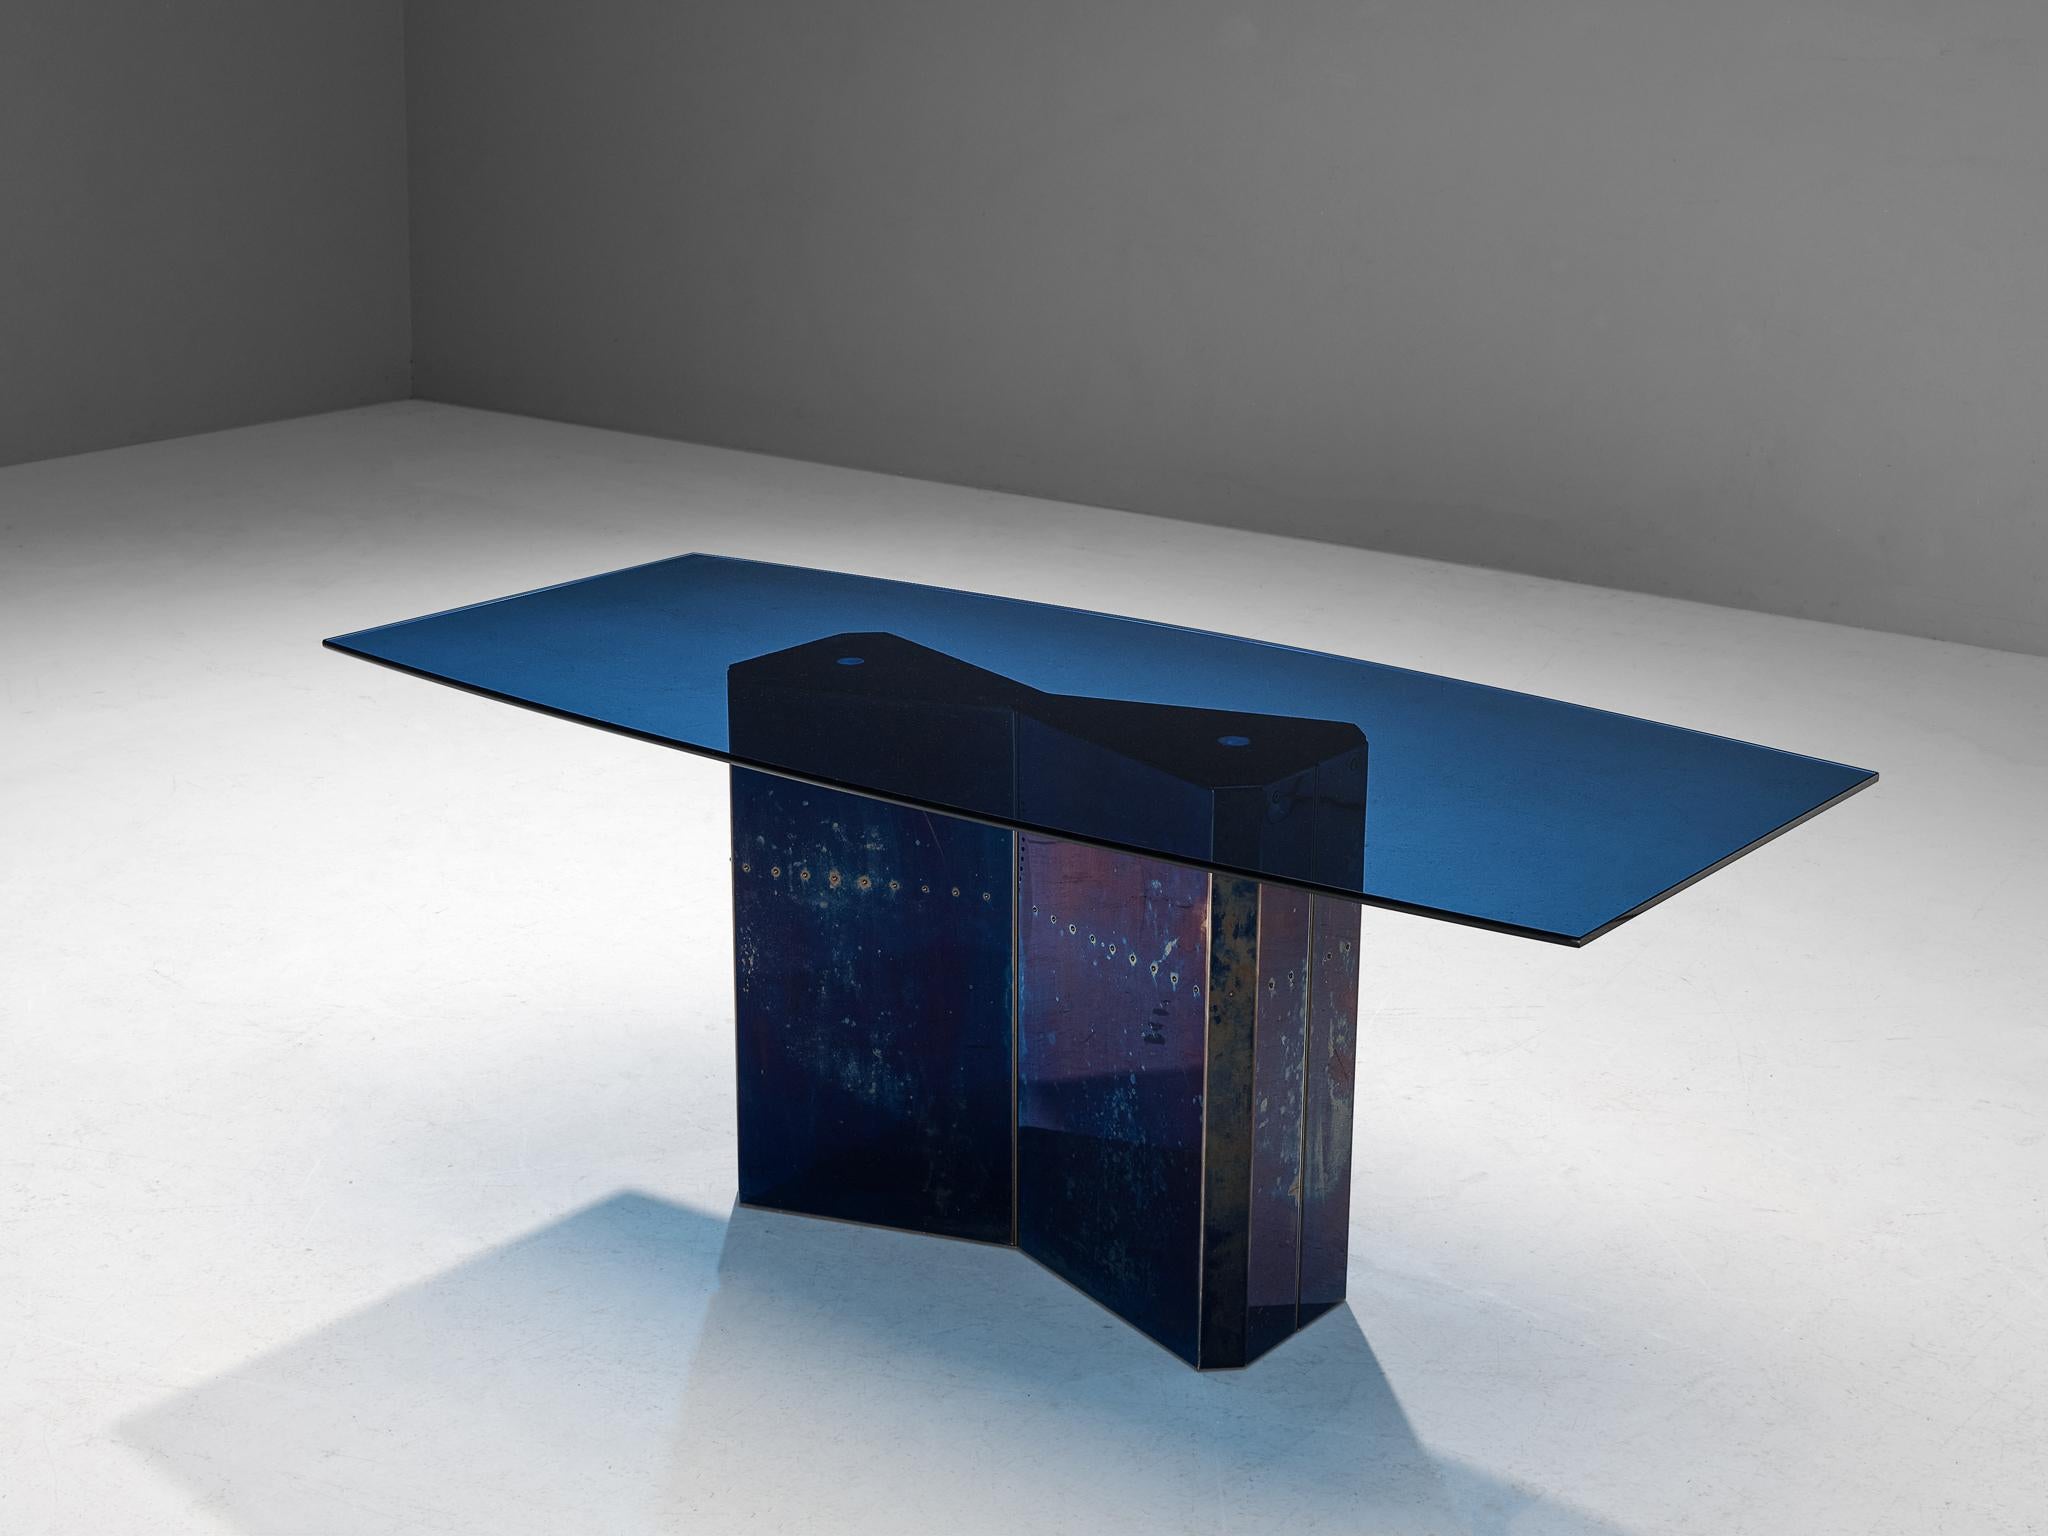 Afra & Tobia Scarpa for B&B Italia, dining table 'Polygonon', glass, electro-coated stainless steel, Italy, 1984

Behold this astonishing table with an aesthetically pleasing layout designed by the Italian master duo Afra & Tobia Scarpa. This